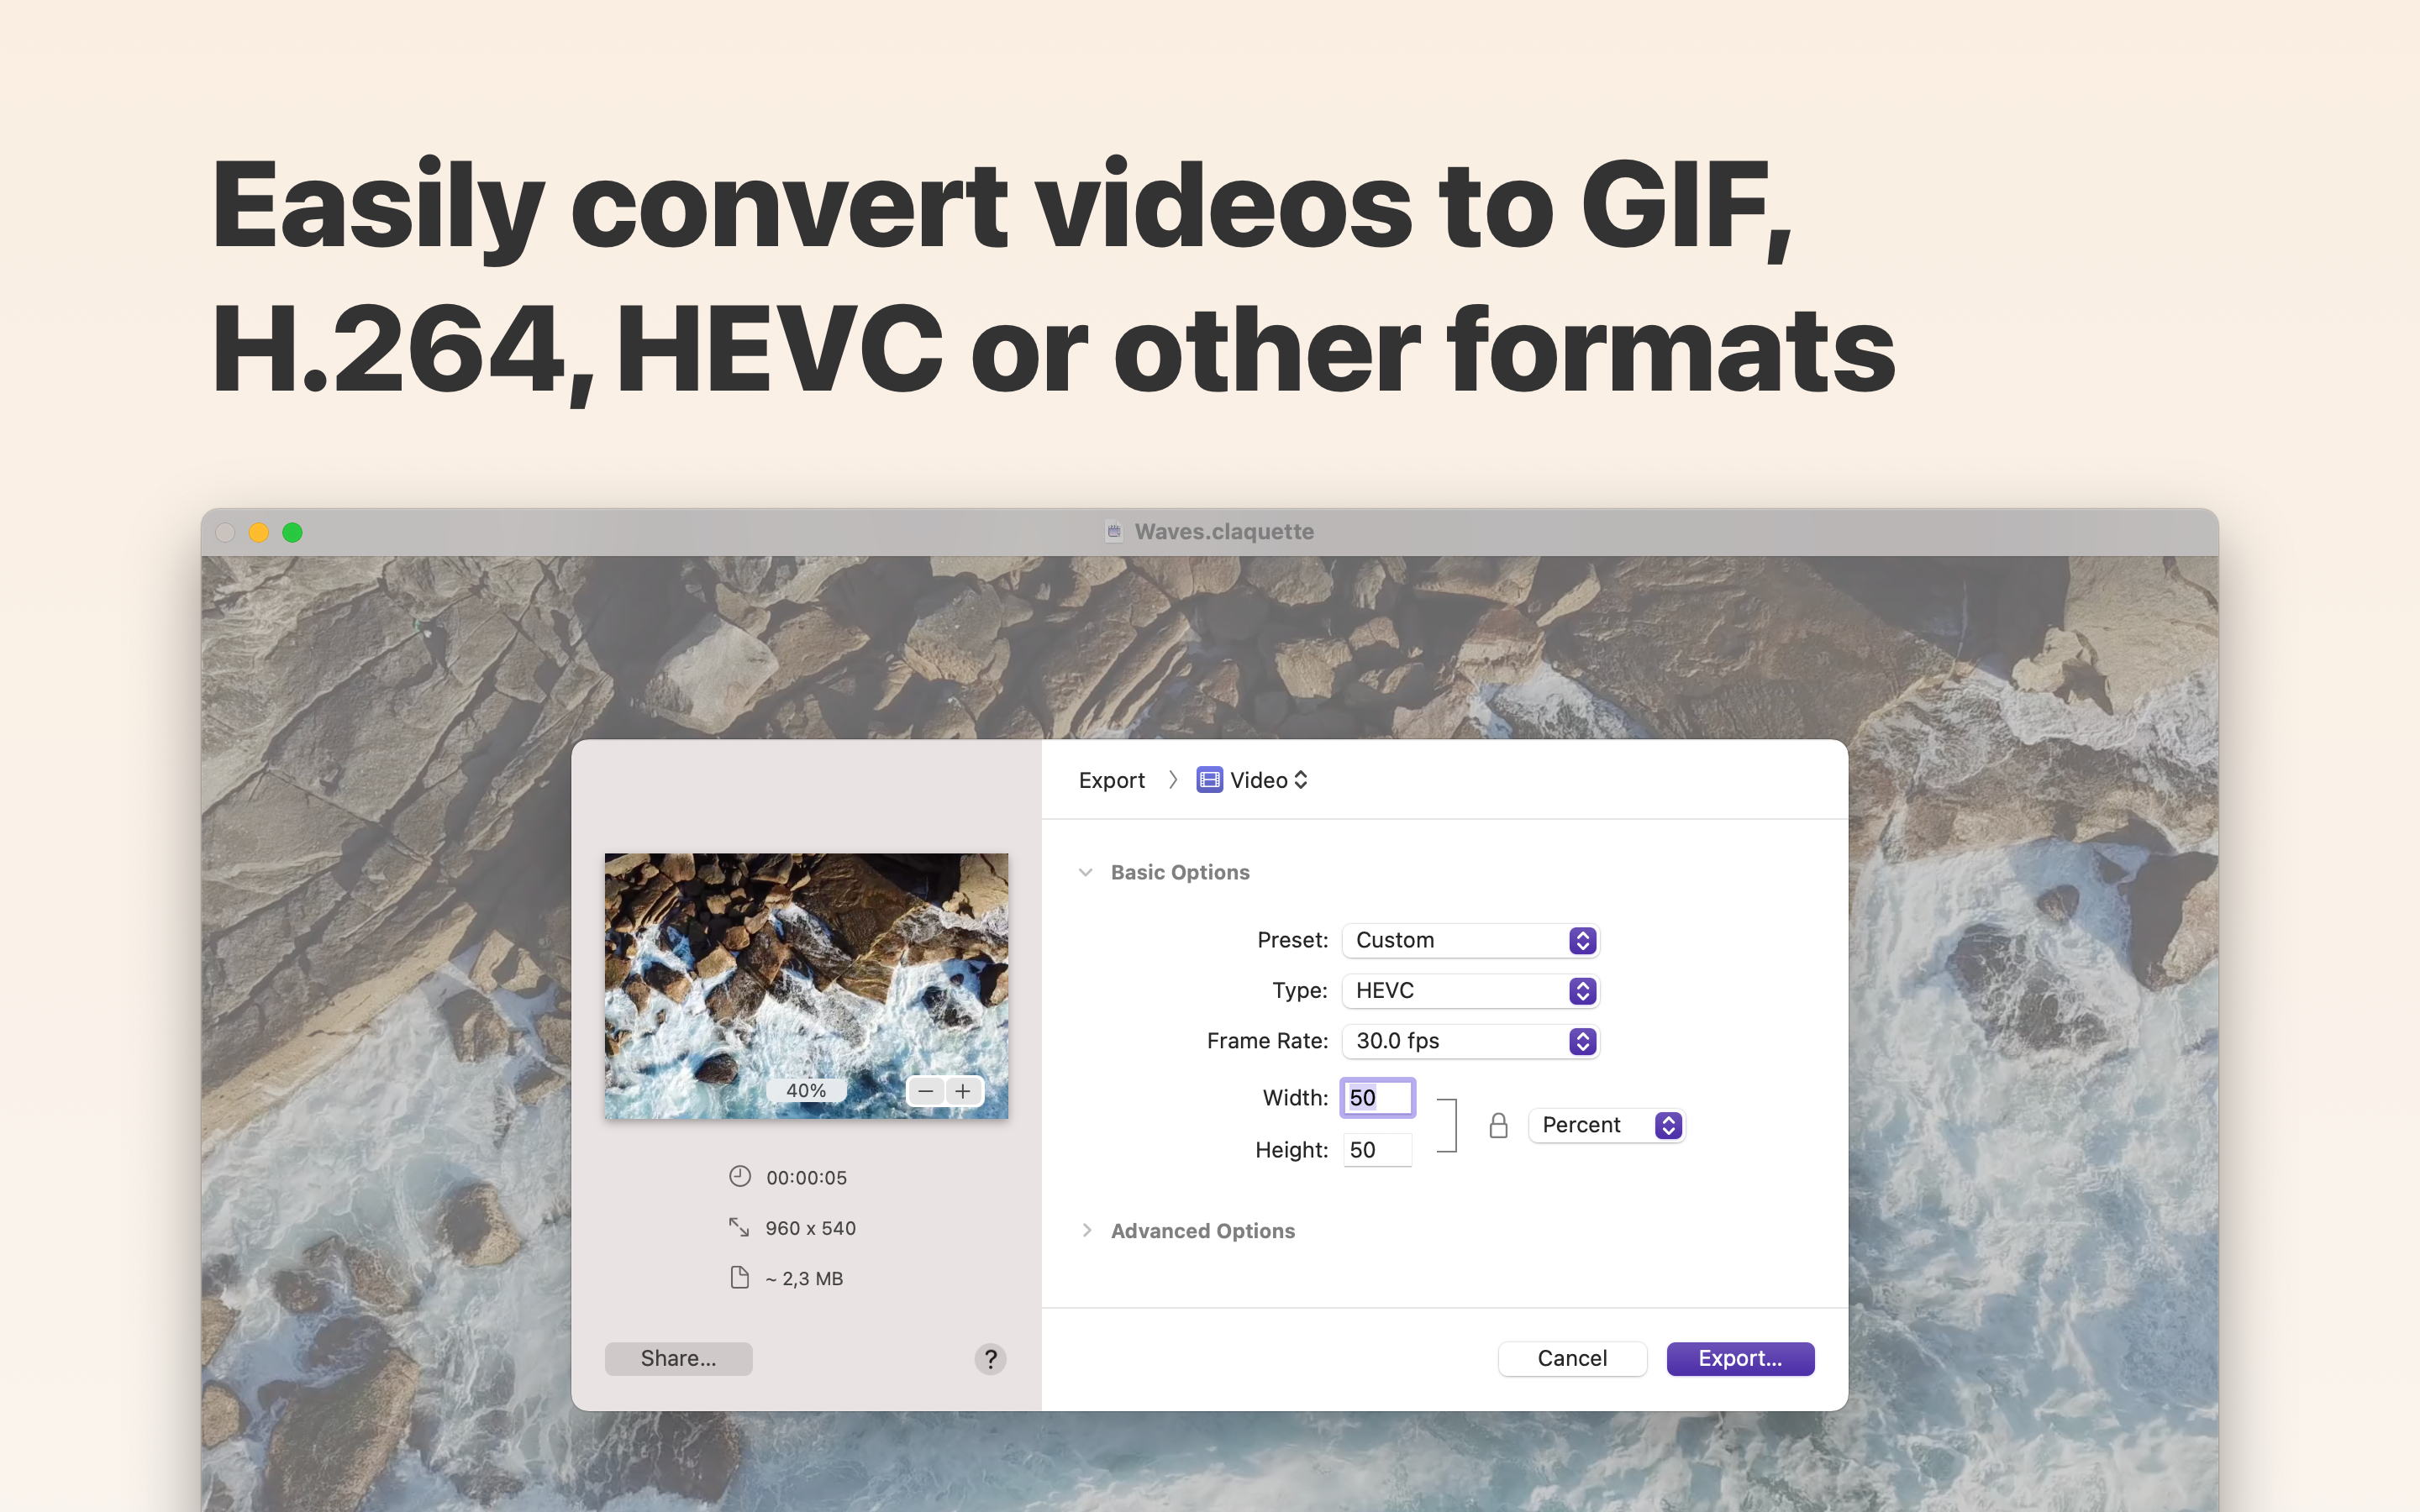 Easily convert video to GIF, H.264, HEVC or other formats